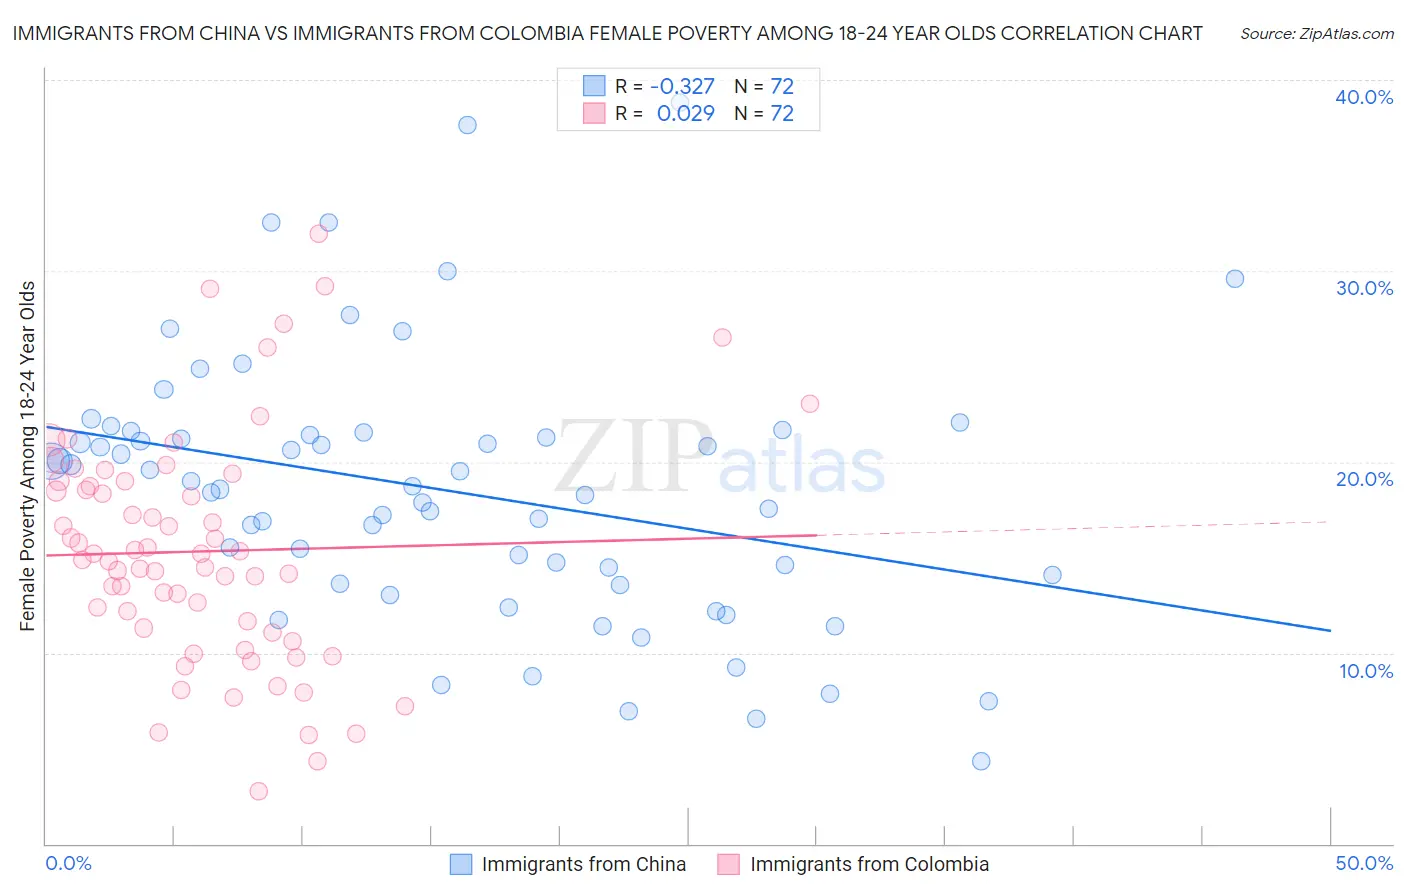 Immigrants from China vs Immigrants from Colombia Female Poverty Among 18-24 Year Olds